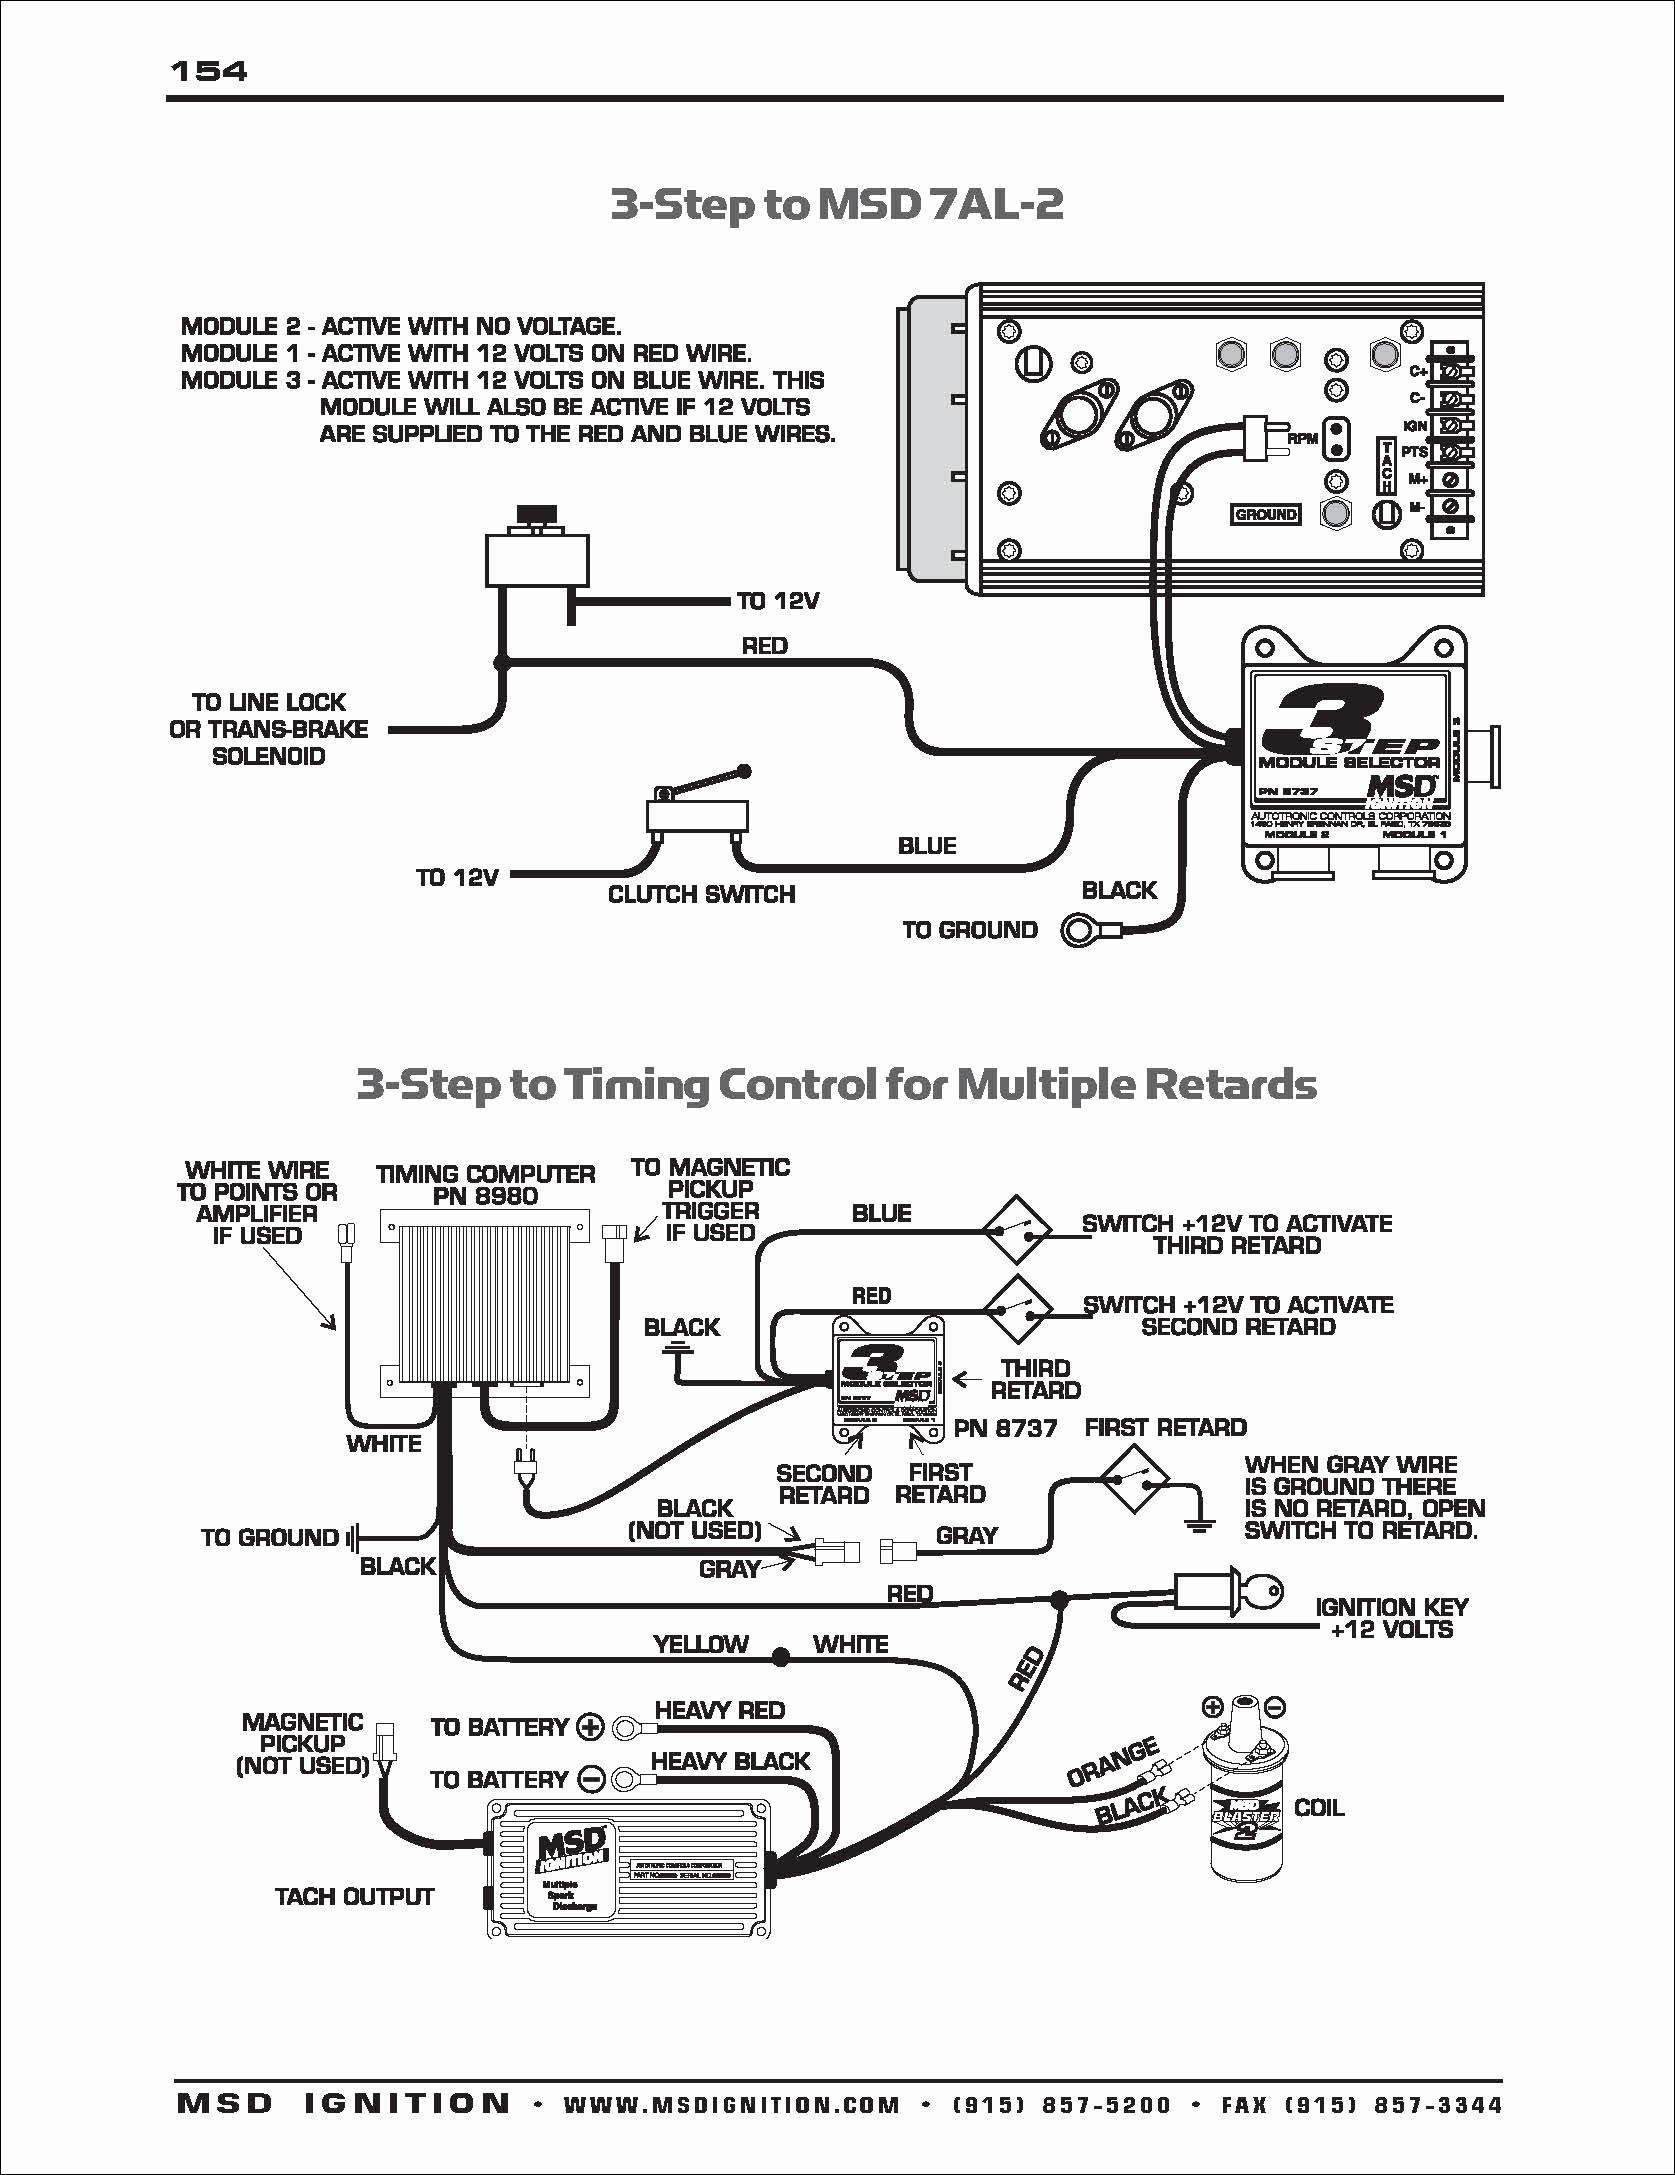 How to Wire A Transfer Switch for A Generator Diagram 86de7a Kohler Ignition Switch Wiring Diagram Of How to Wire A Transfer Switch for A Generator Diagram